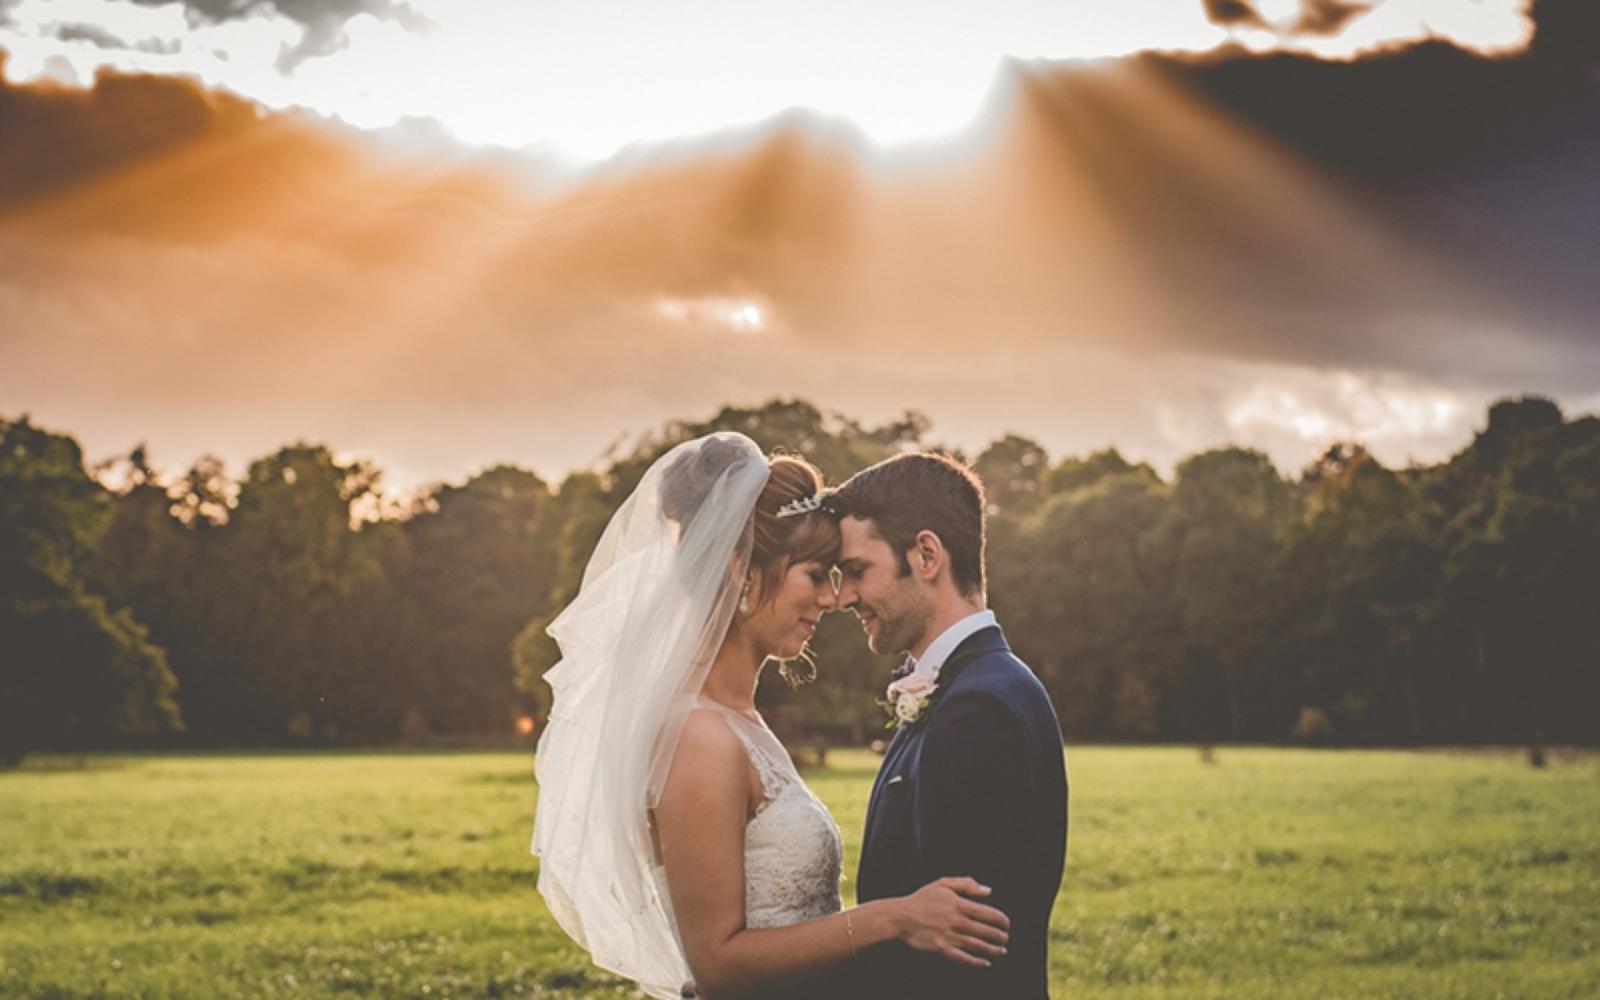 Capture Every Moment real wedding photography cirencester Hare & Hounds Tetbury beautiful sky